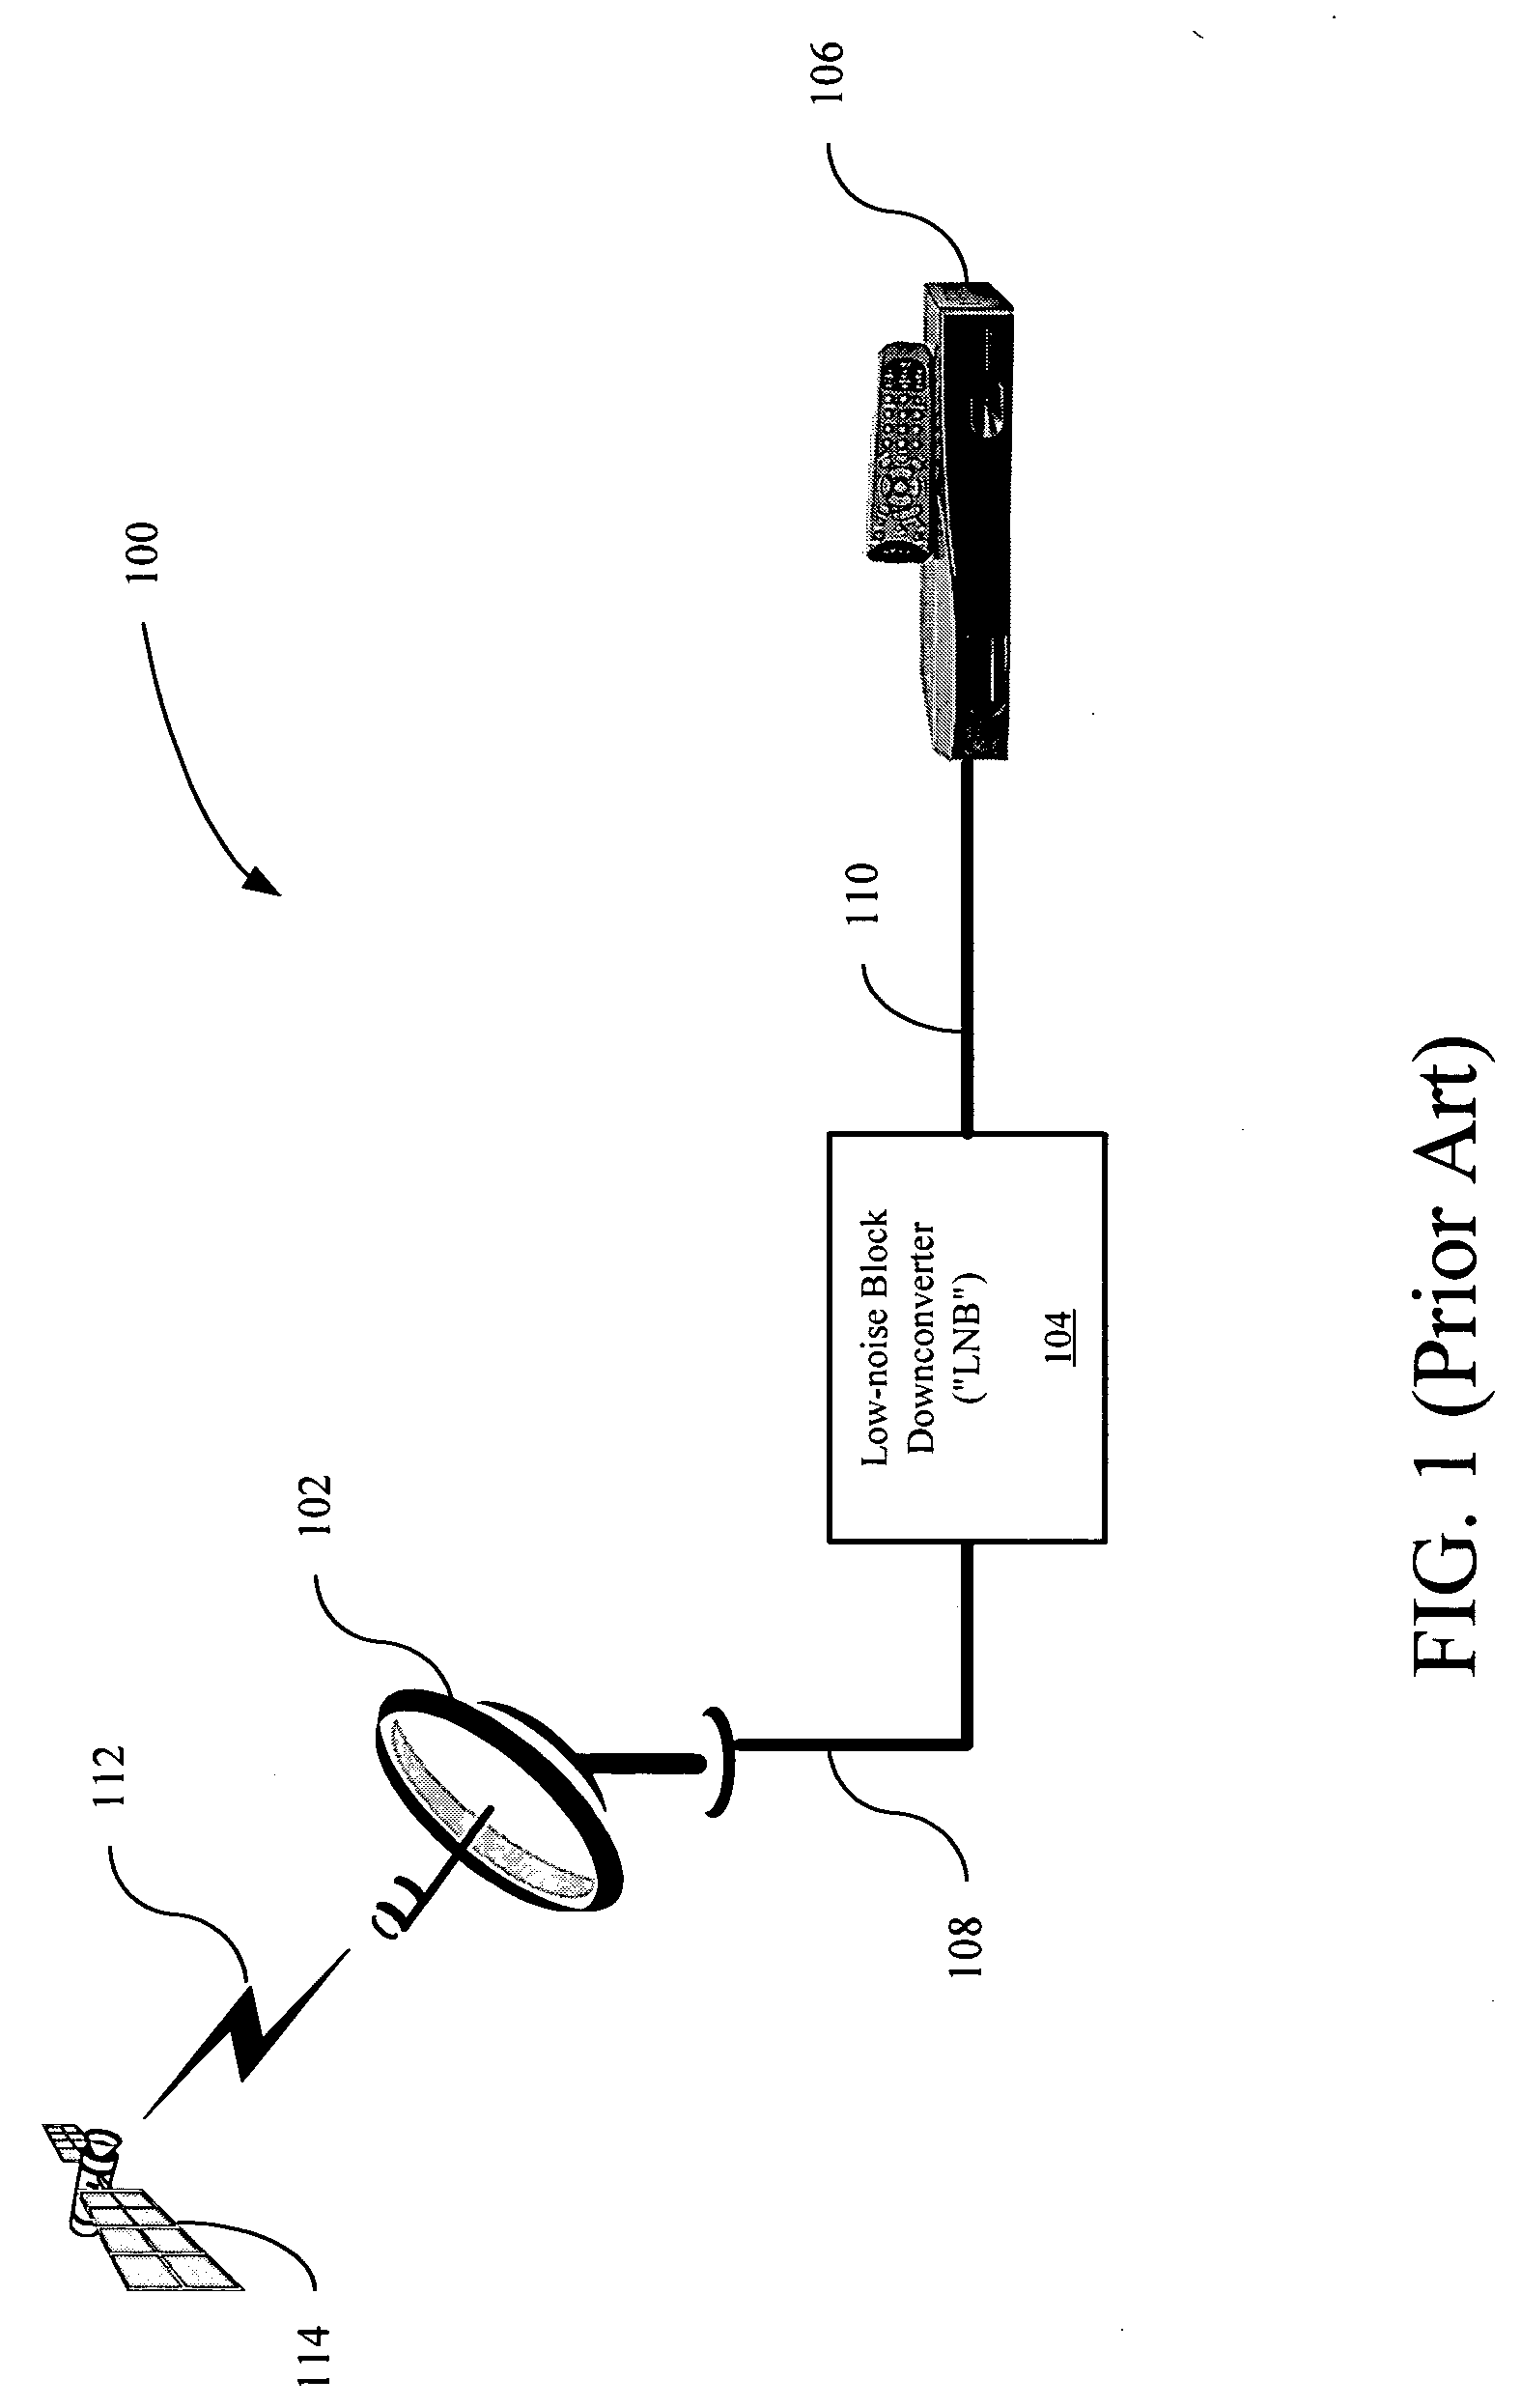 Simultaneous multiple channel receiver